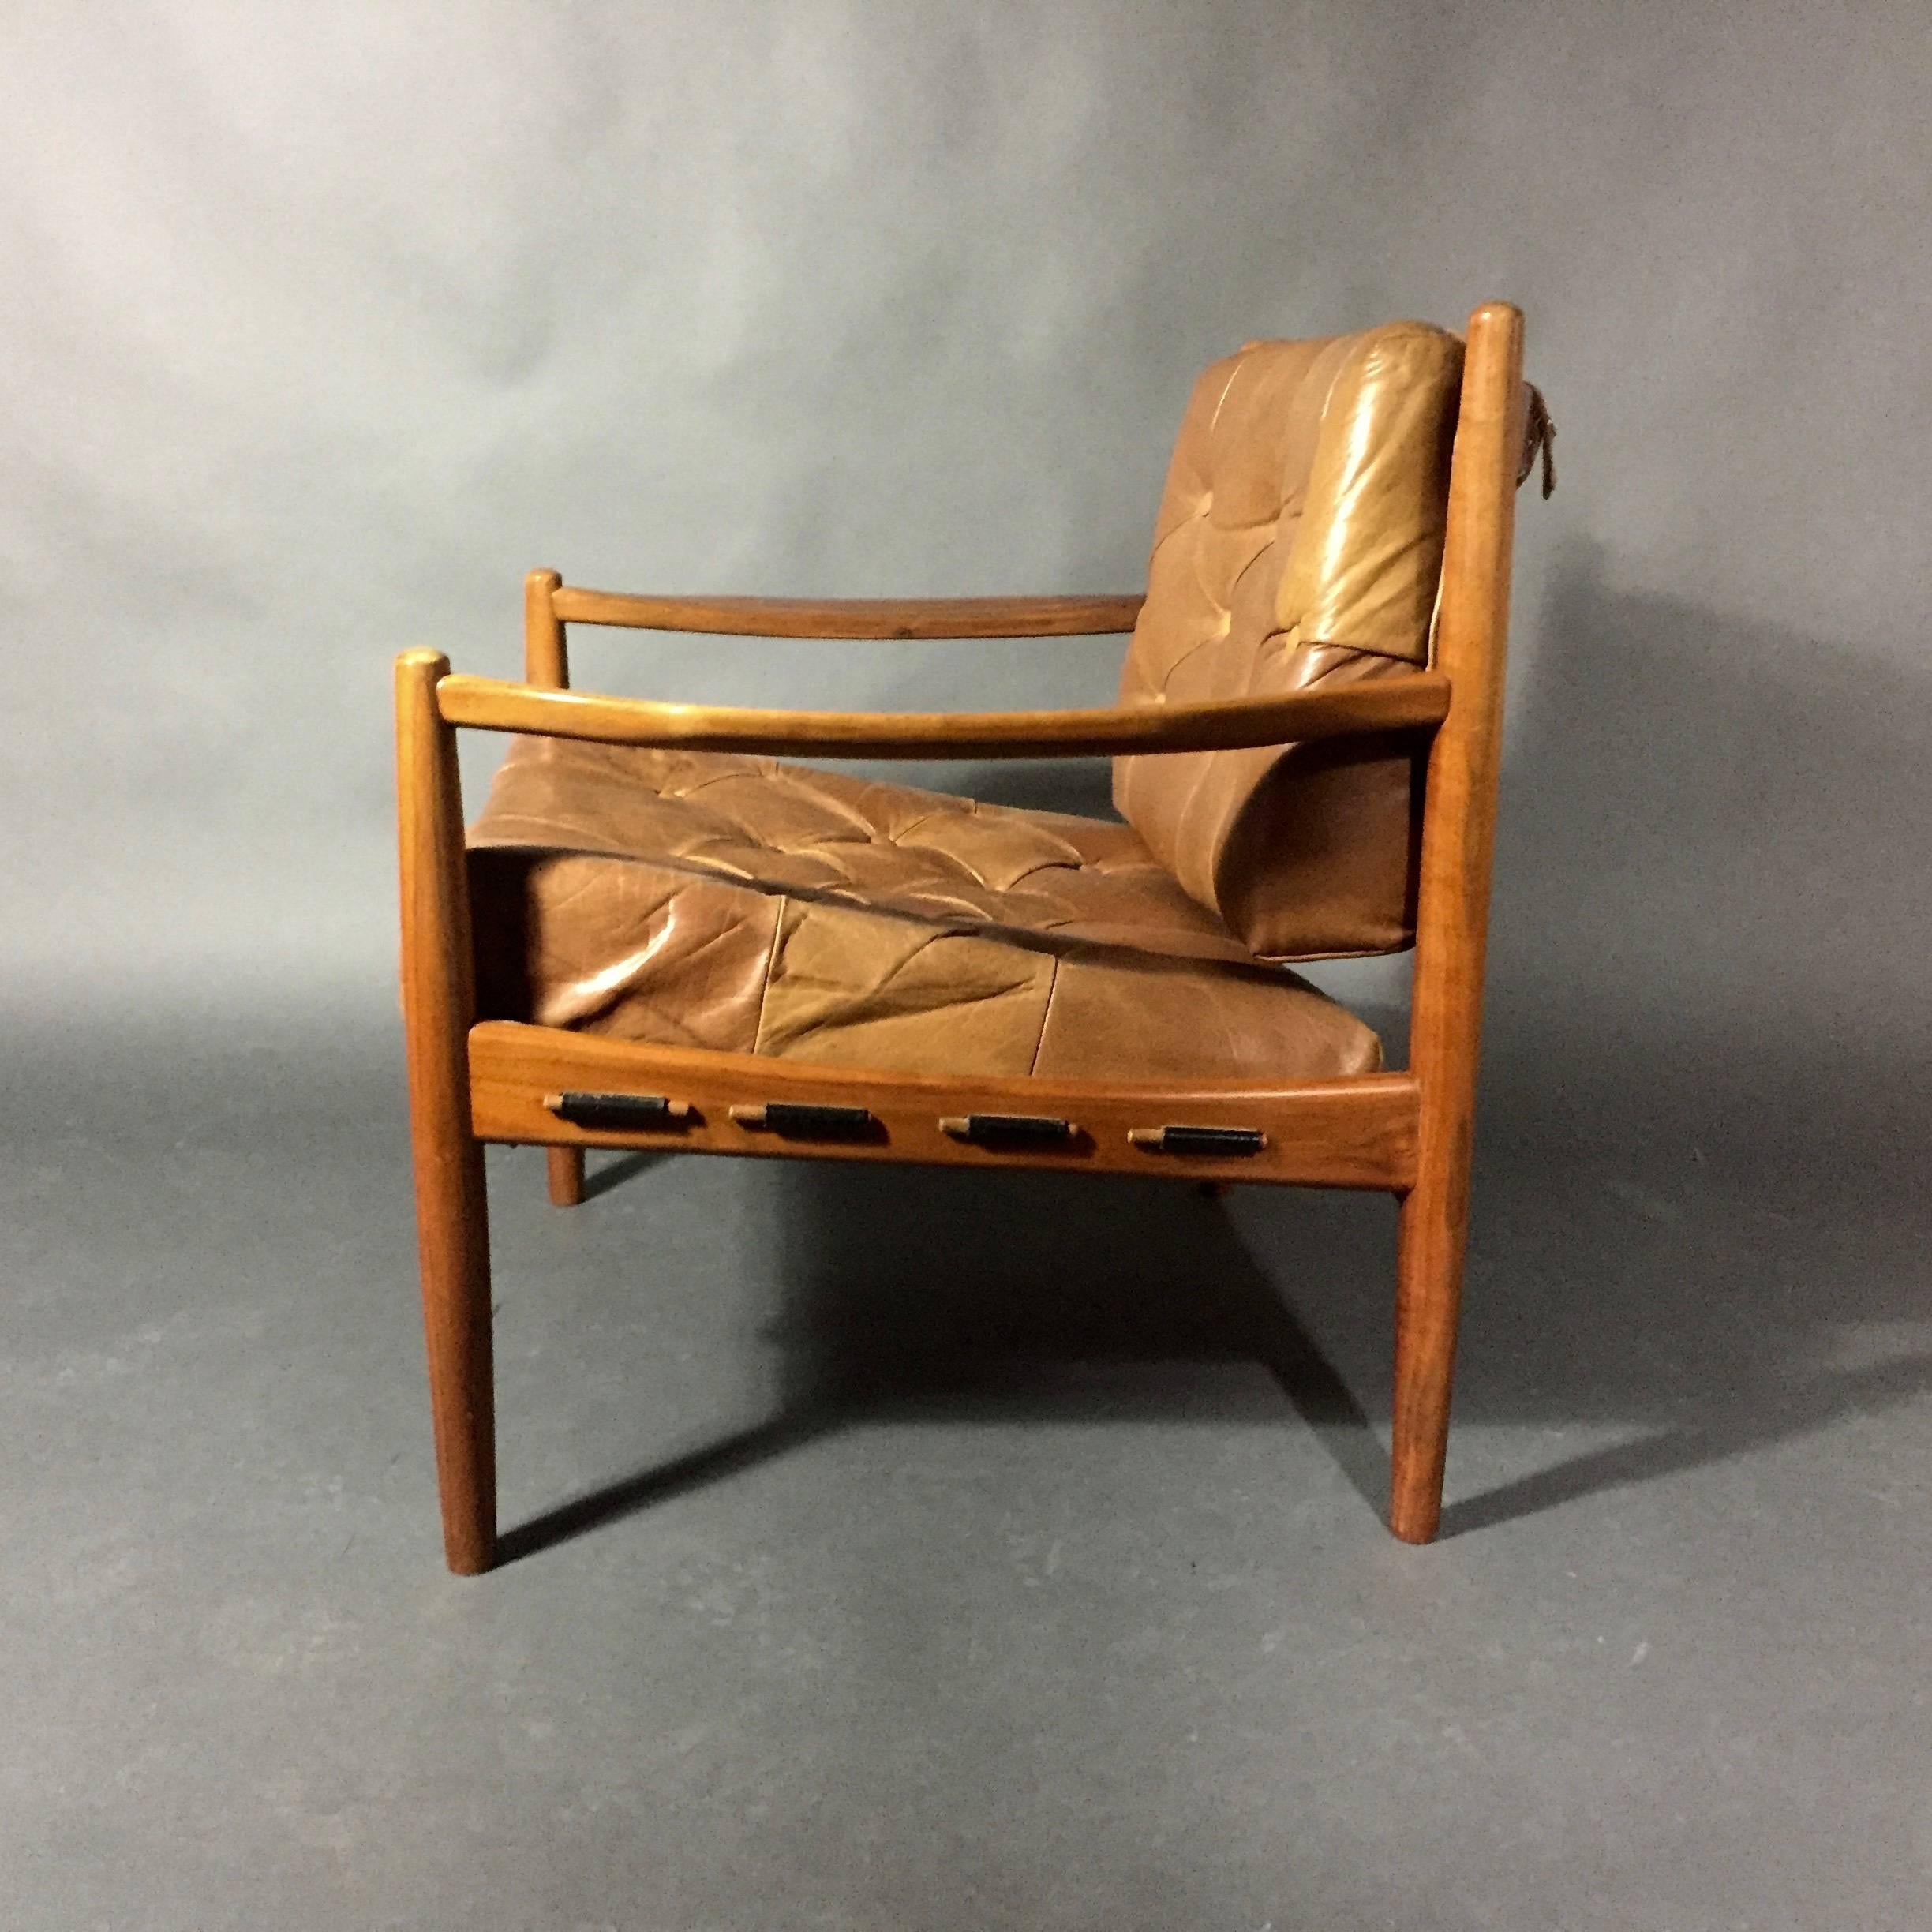 Ingemar Thillmark Läckö Hög Lounge Chair, OPE, Sweden, 1960s In Good Condition For Sale In Hudson, NY